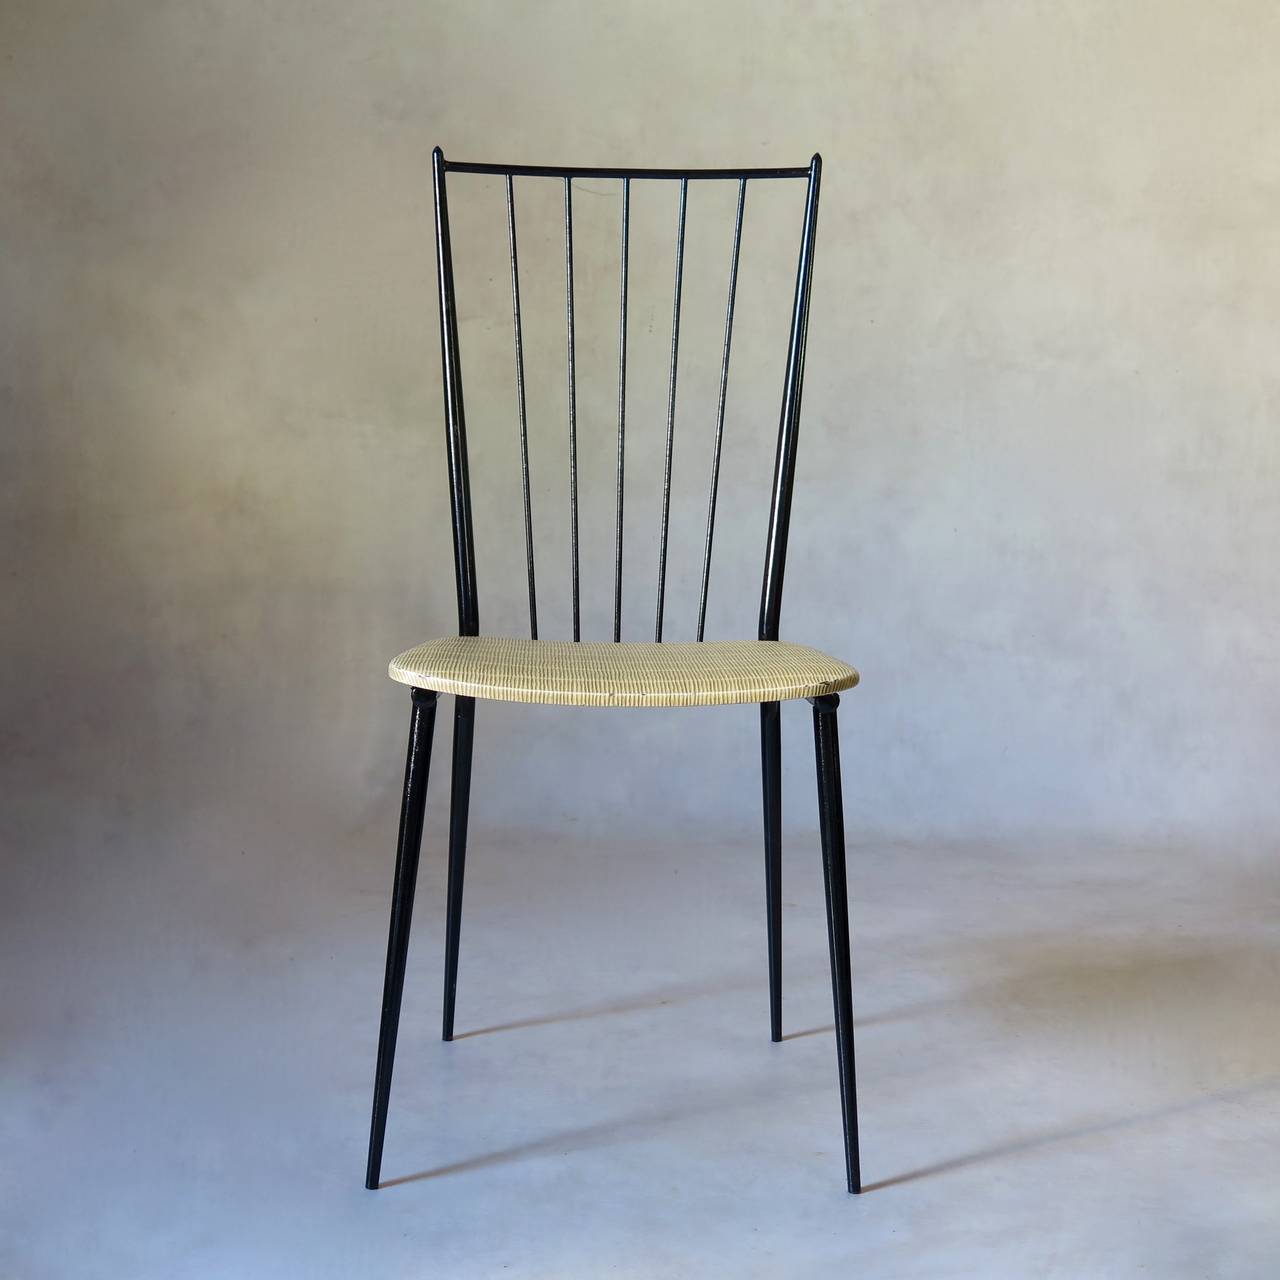 Set of six chairs in the style of French Mid-Century designer Colette Gueden. Tubular iron structure with black lacquered finish. The seats are upholstered in textured faux-straw vinyl.